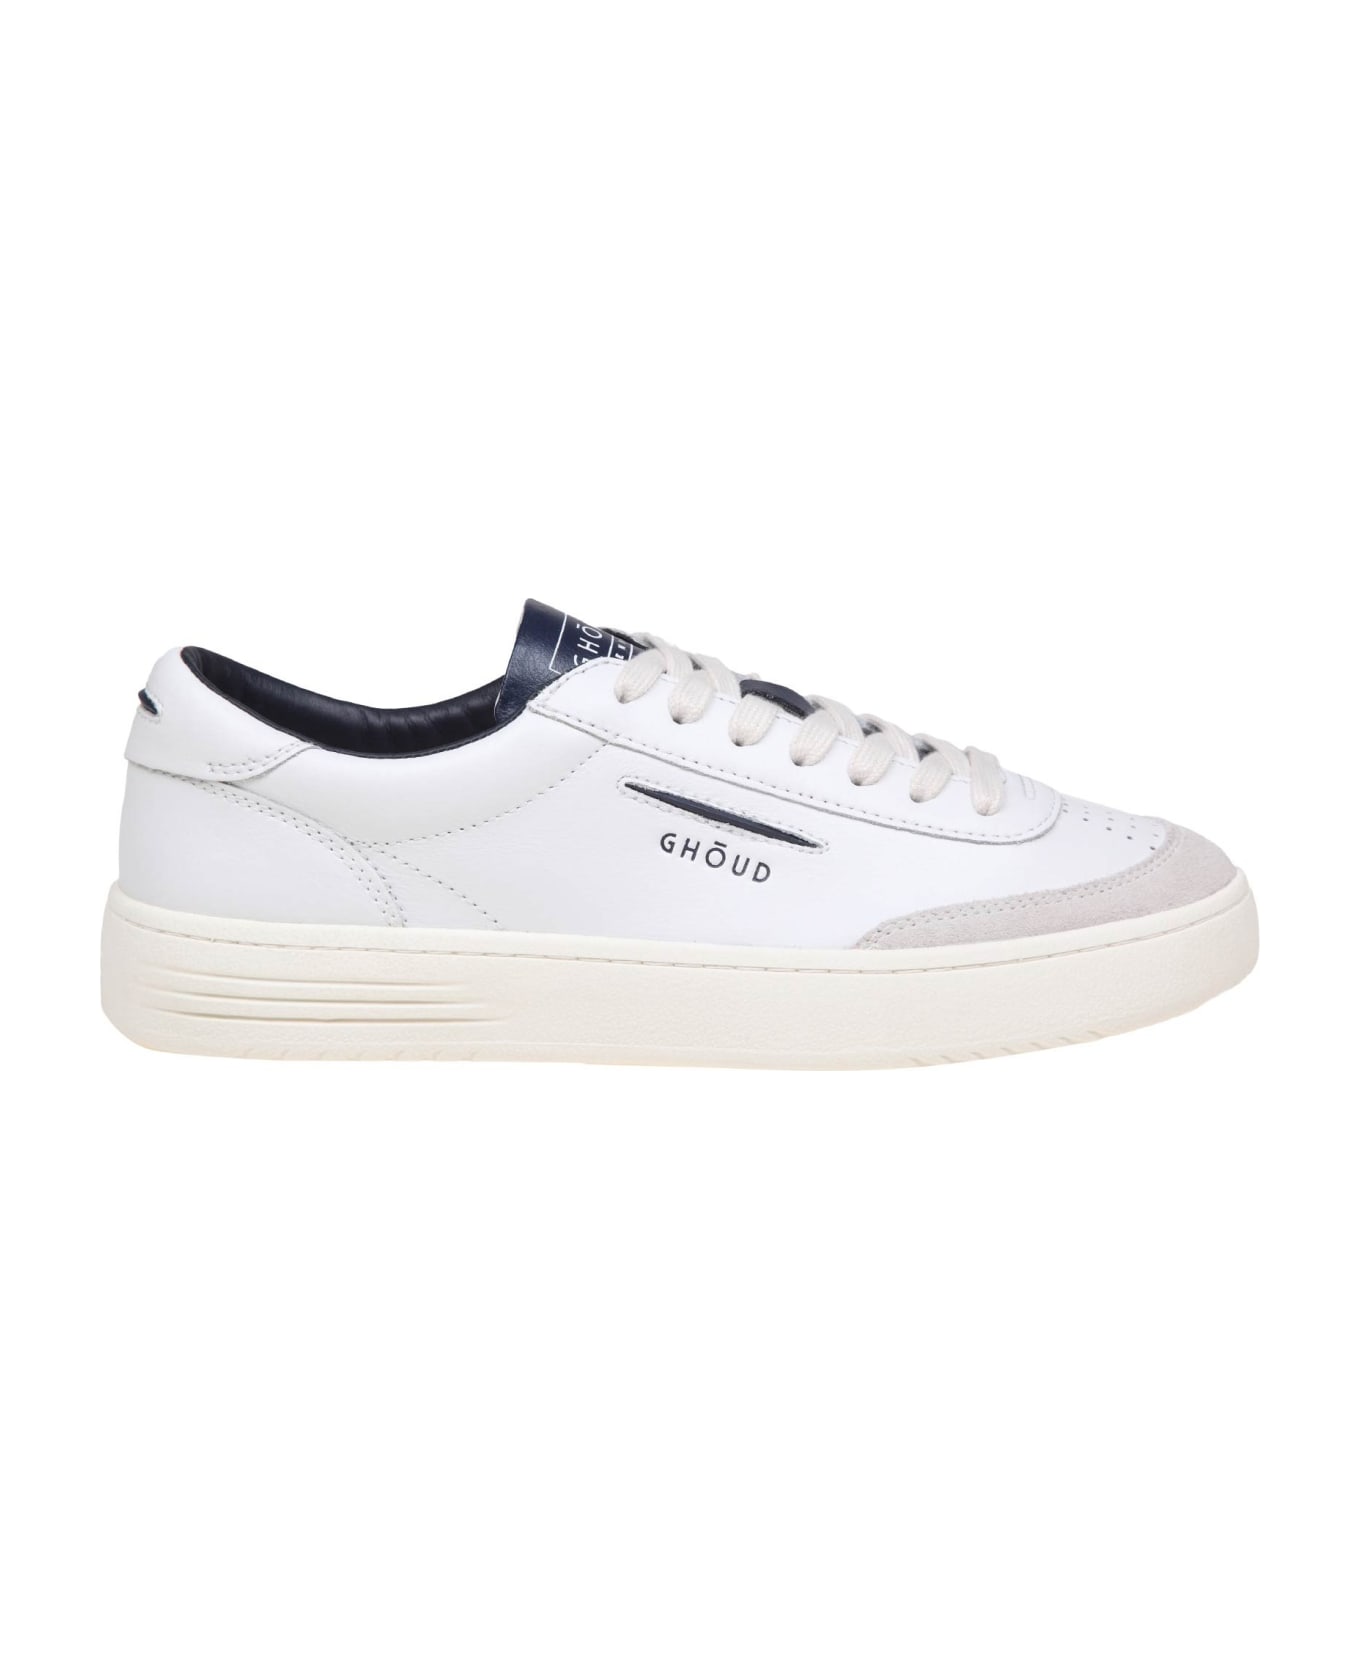 GHOUD Lido Low Sneakers In White/blue Leather And Suede - LEAT/SUEDE WHT/BLUE